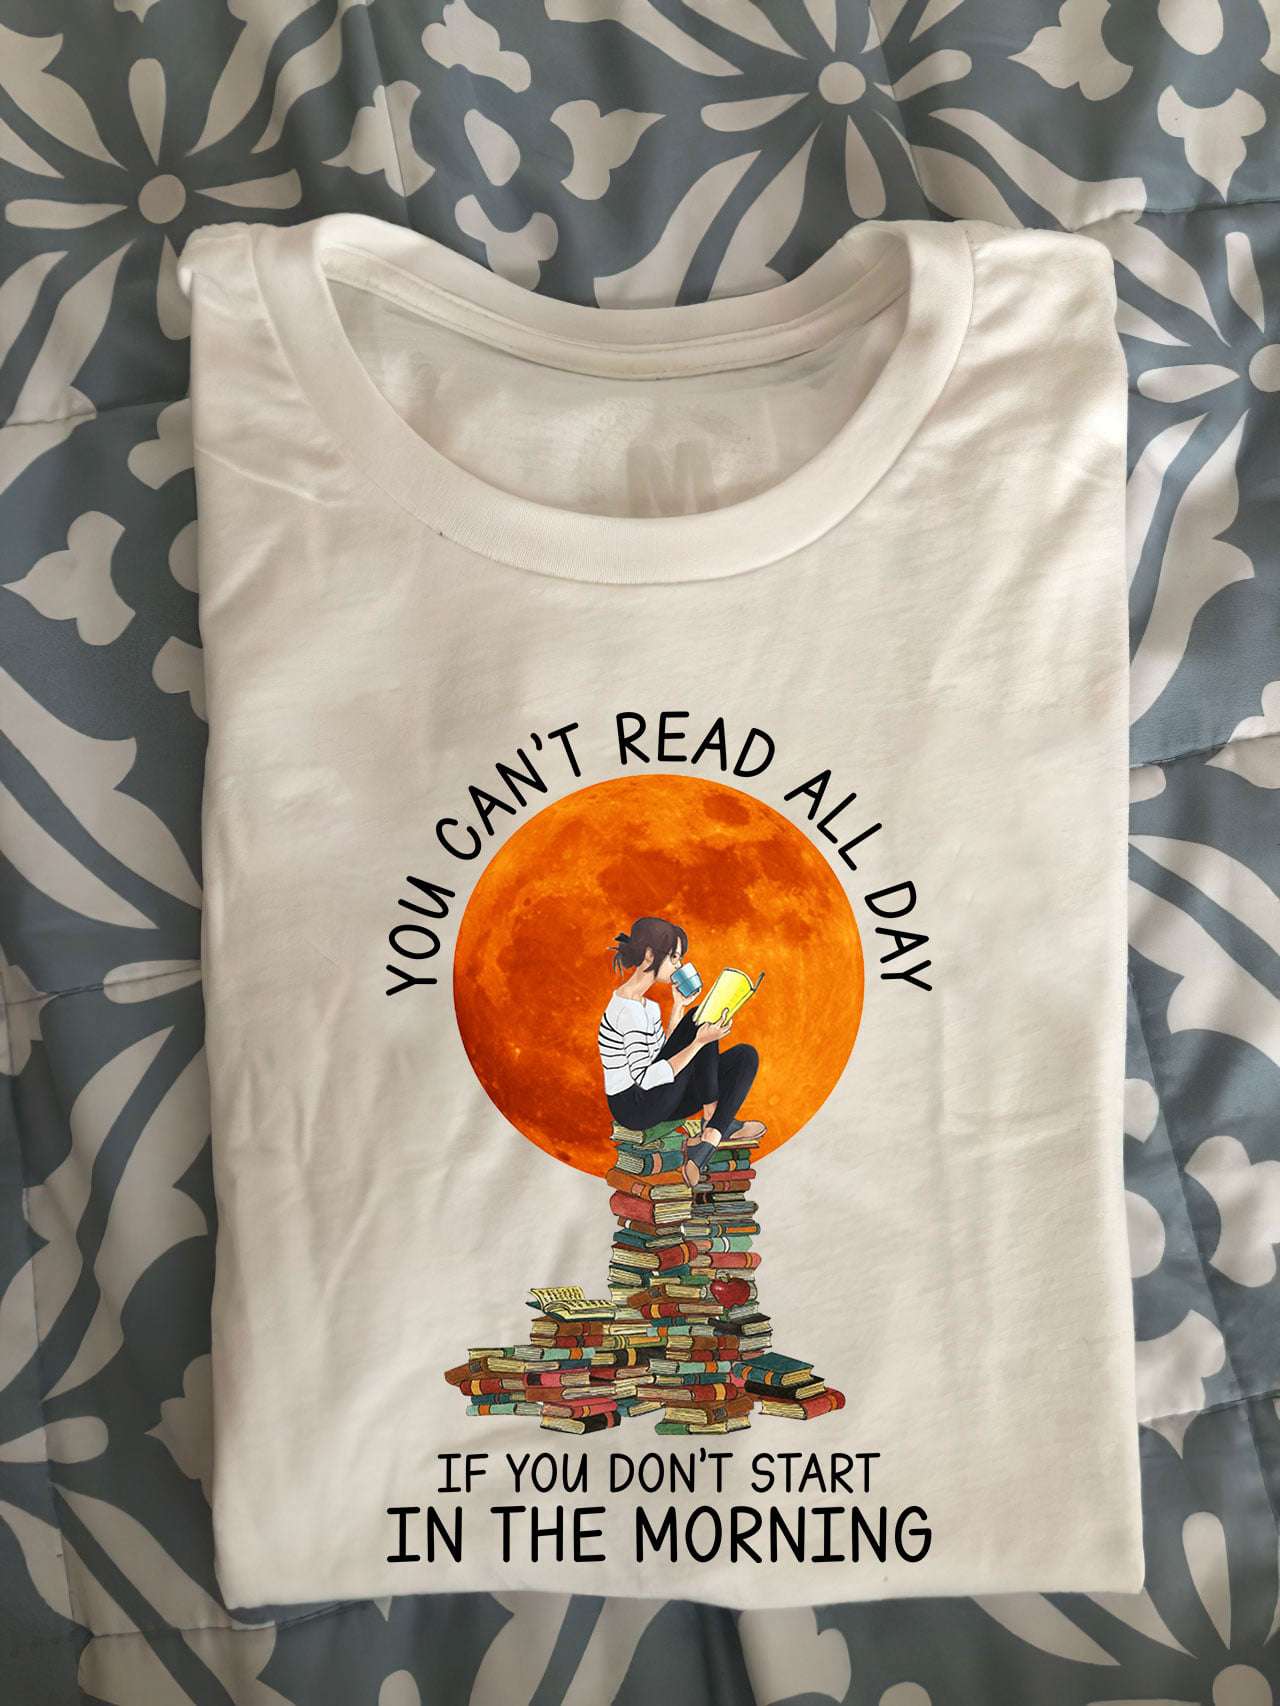 You can't read all day if you don't start in the morning - Girl reading books, start reading in morning